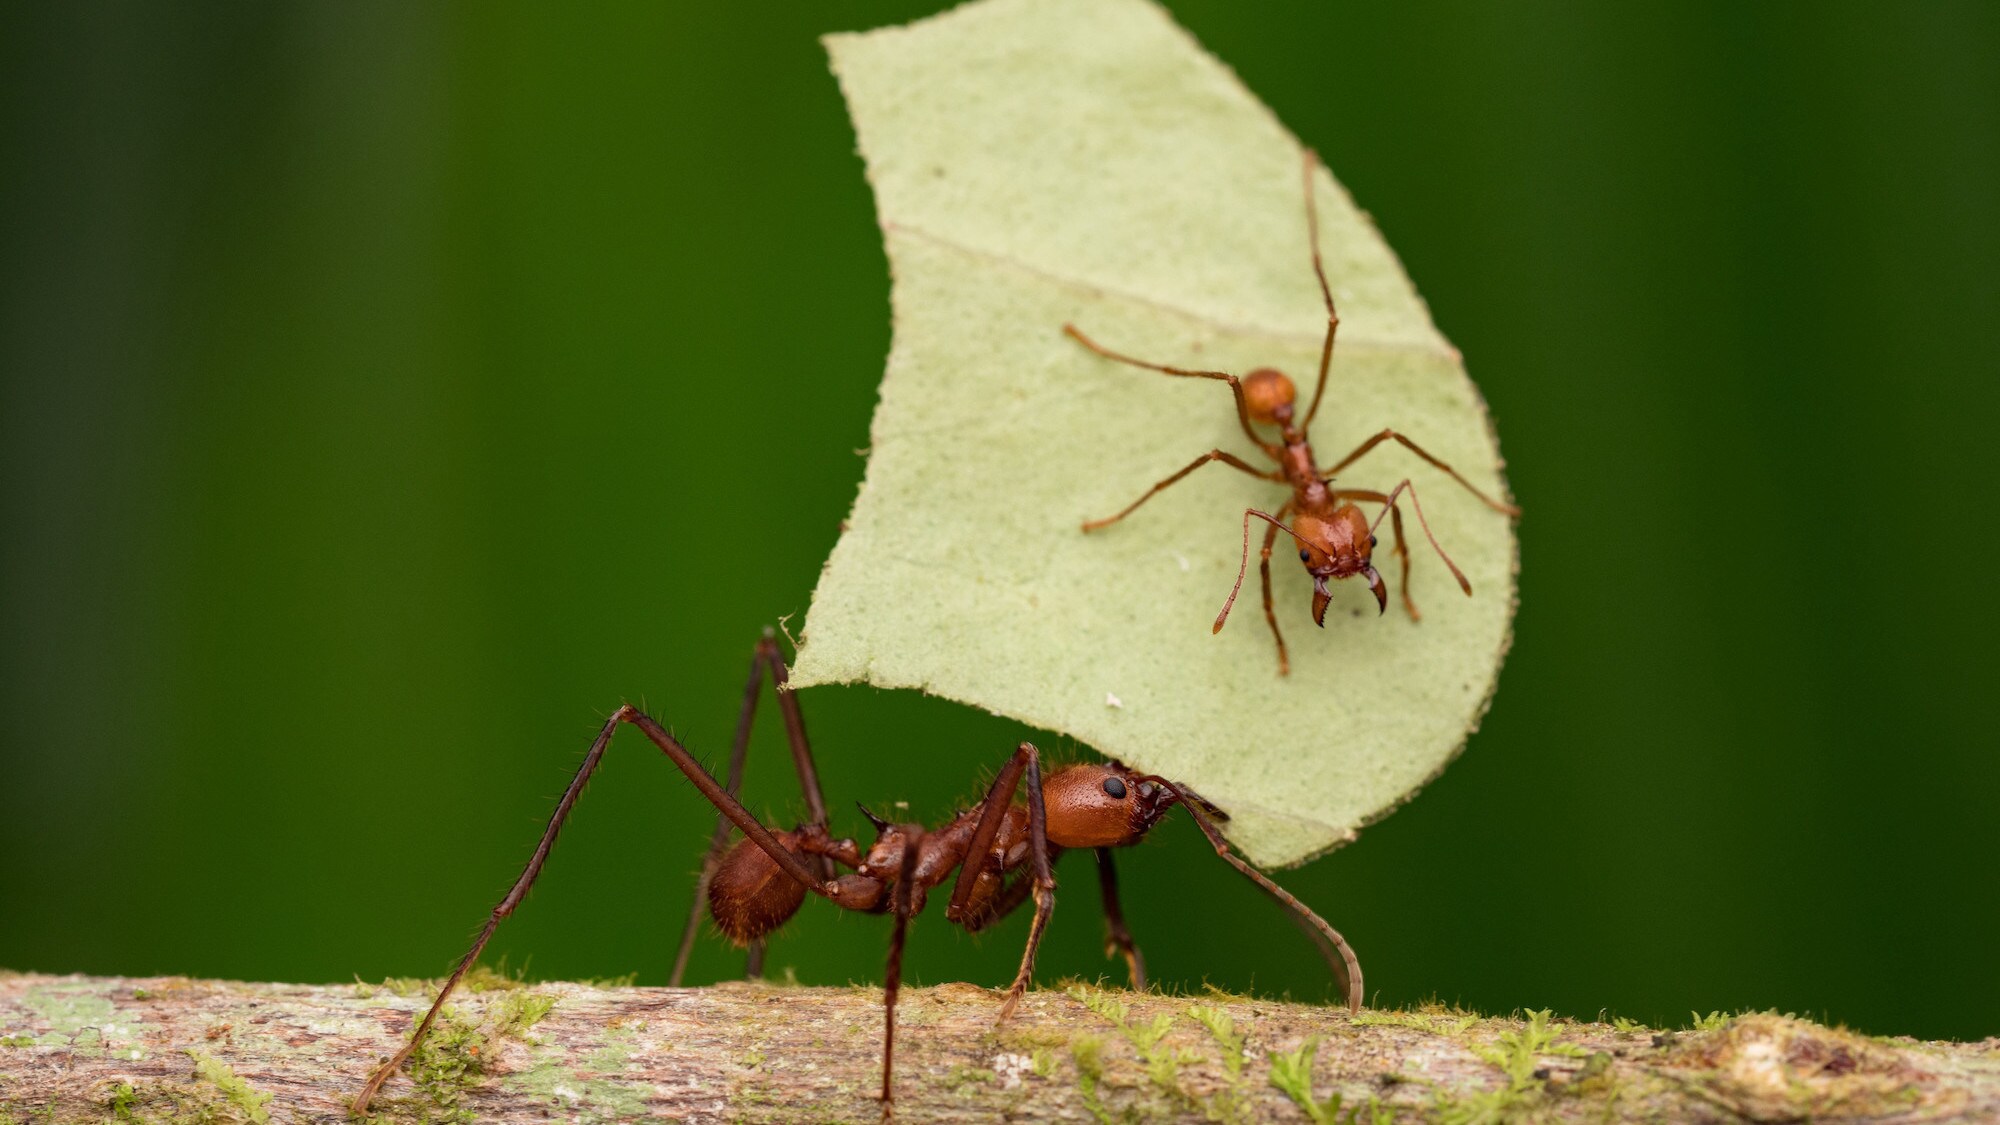 A leafcutter ant carrying a leaf with a smaller leafcutter ant sitting on it is featured in the "Welcome to the Jungle" episode of “A Real Bug’s Life.” (National Geographic/Jeremy Squire)